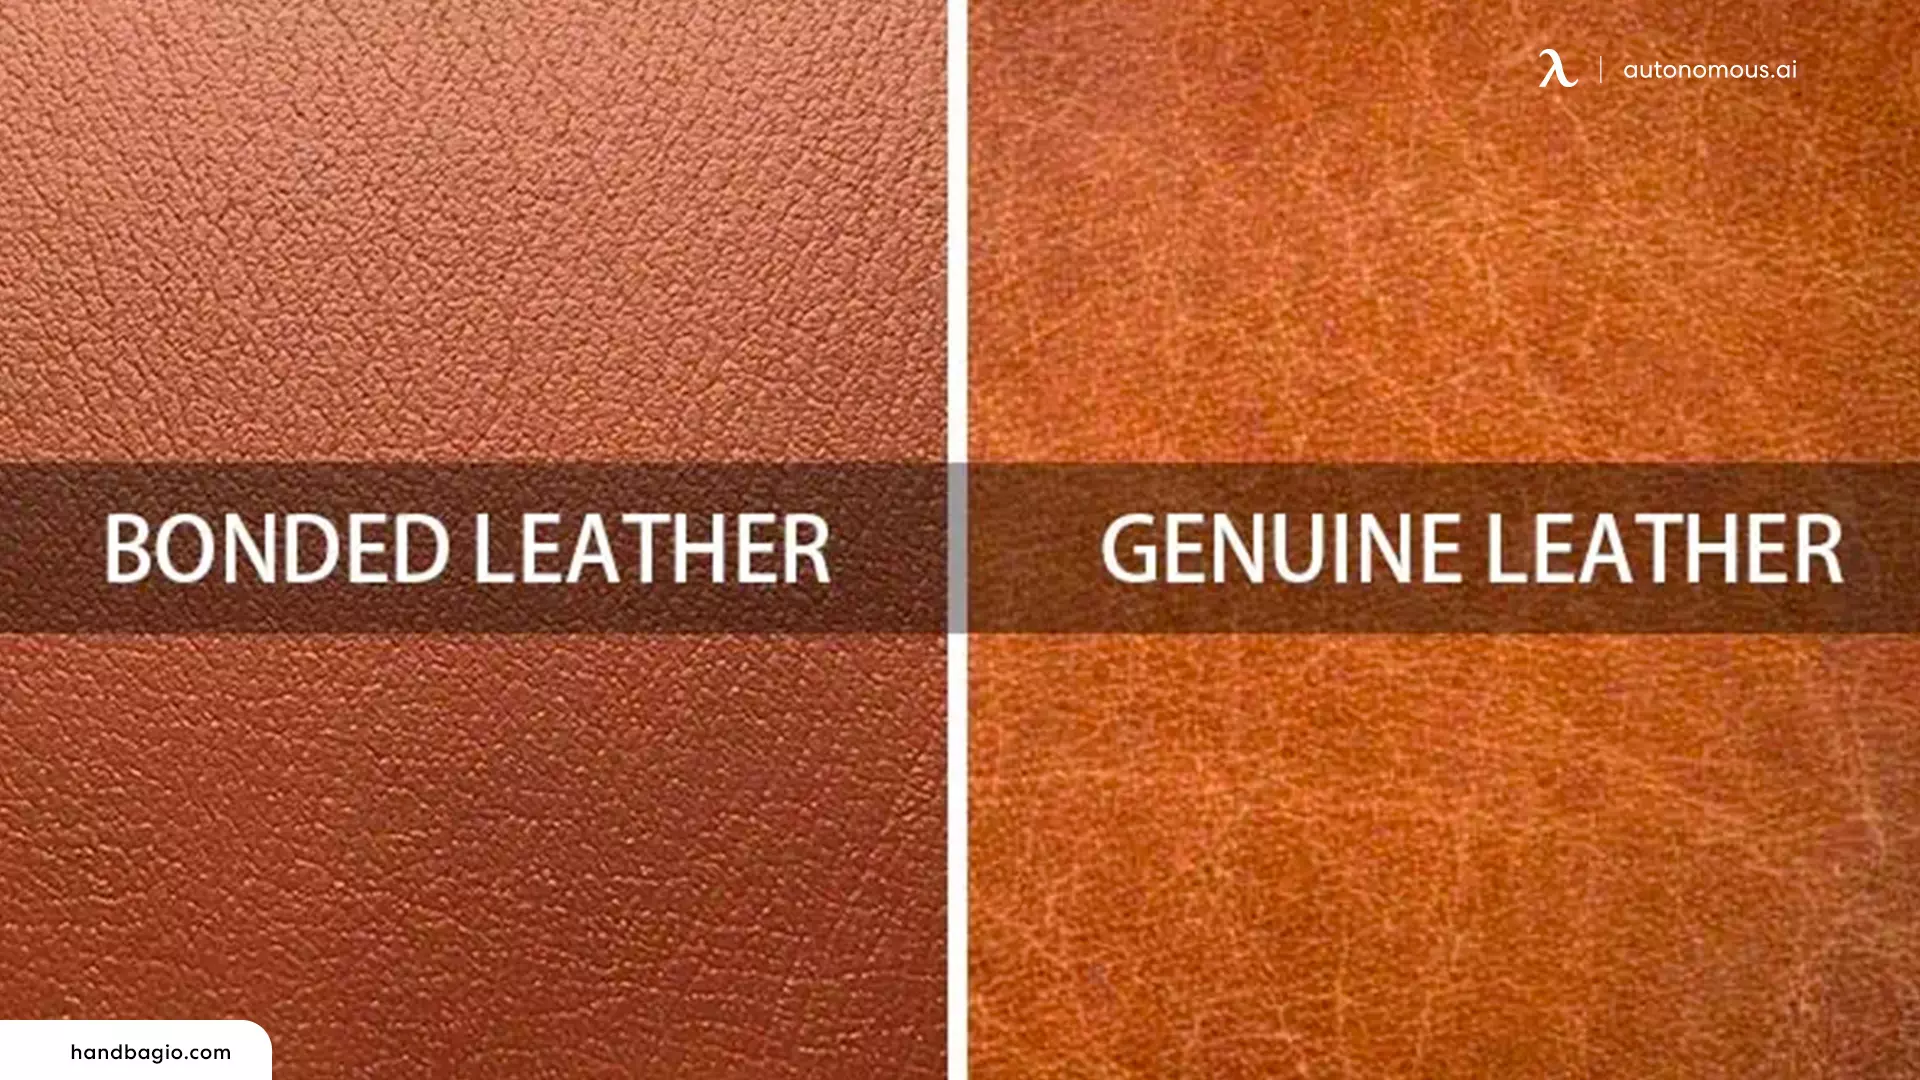 Faux Leather: Better Than Real?